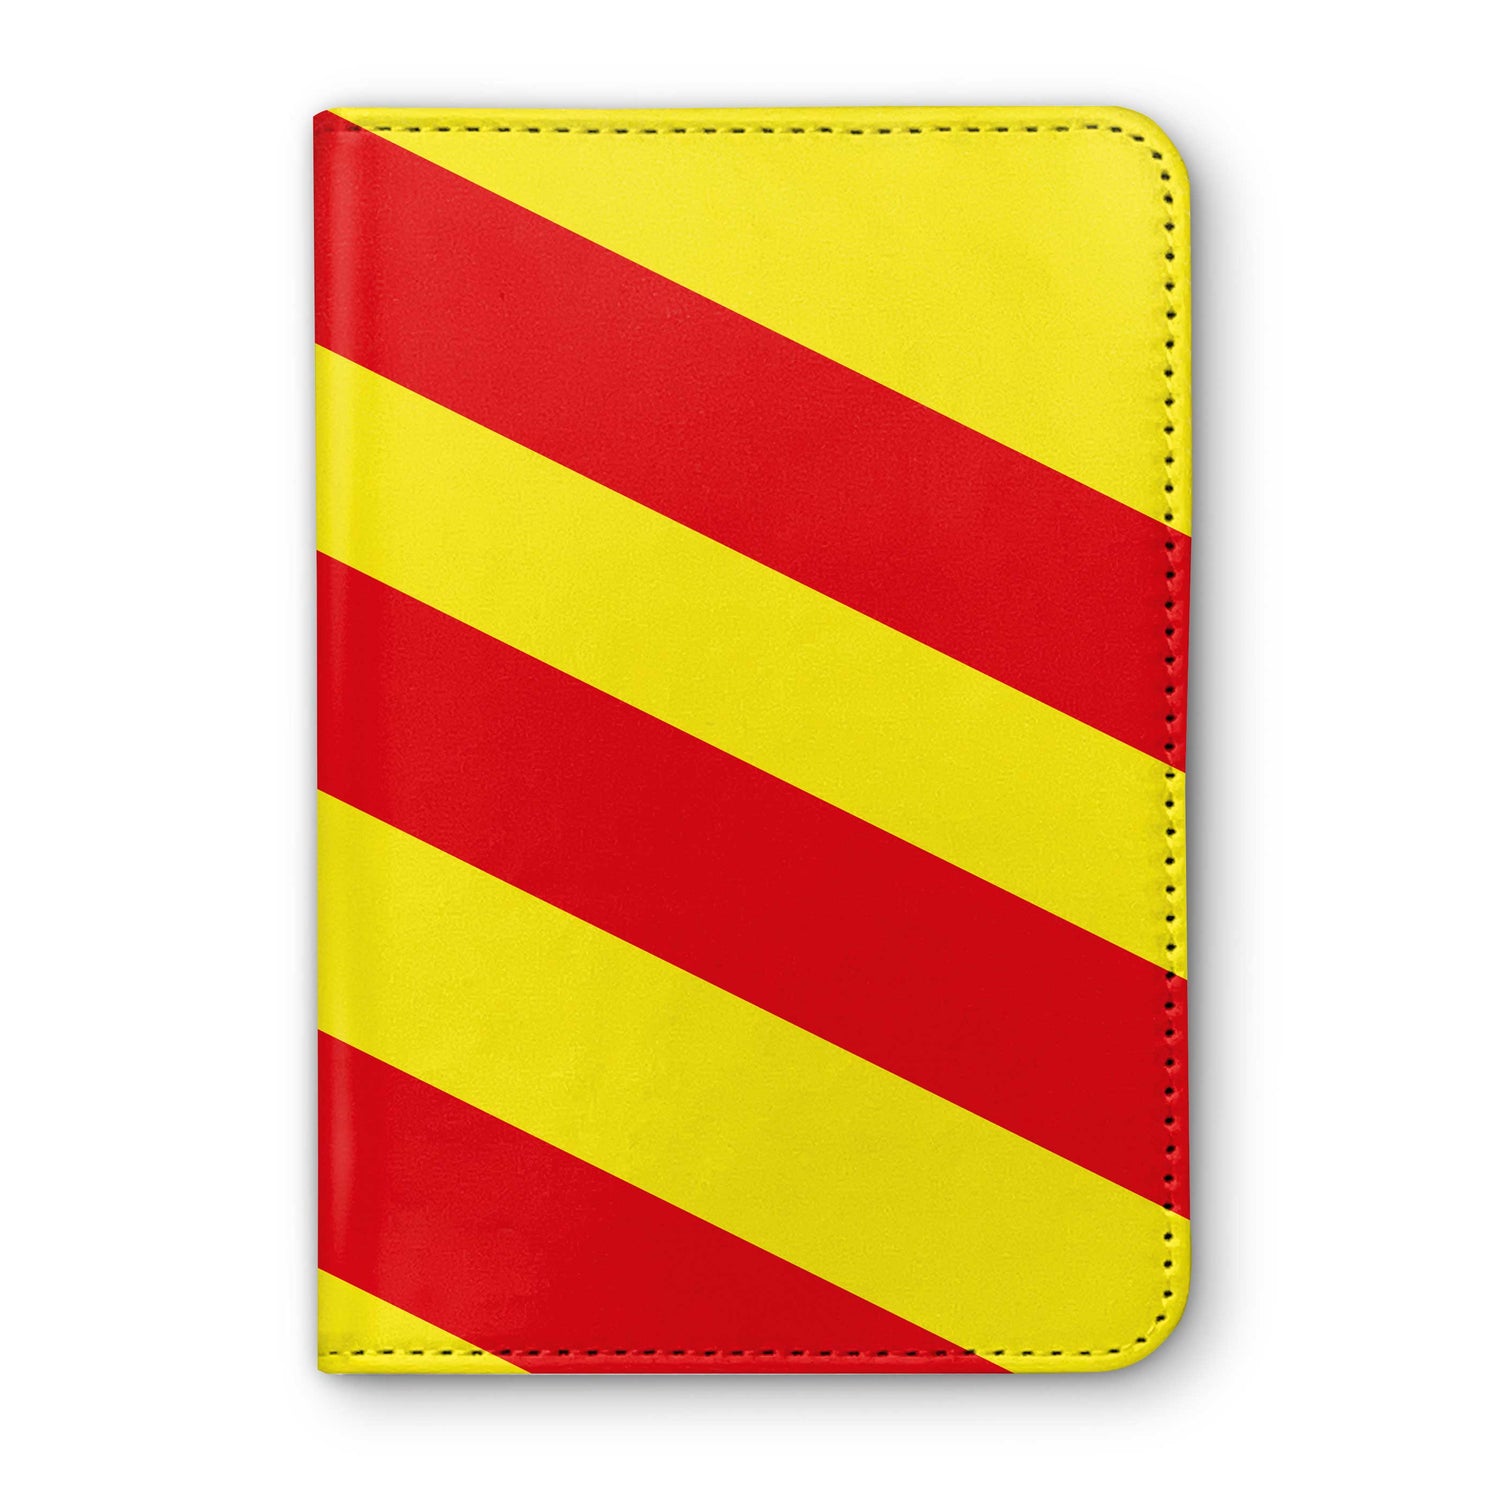 Paul Dean Horse Racing Passport Holder - Hacked Up Horse Racing Gifts